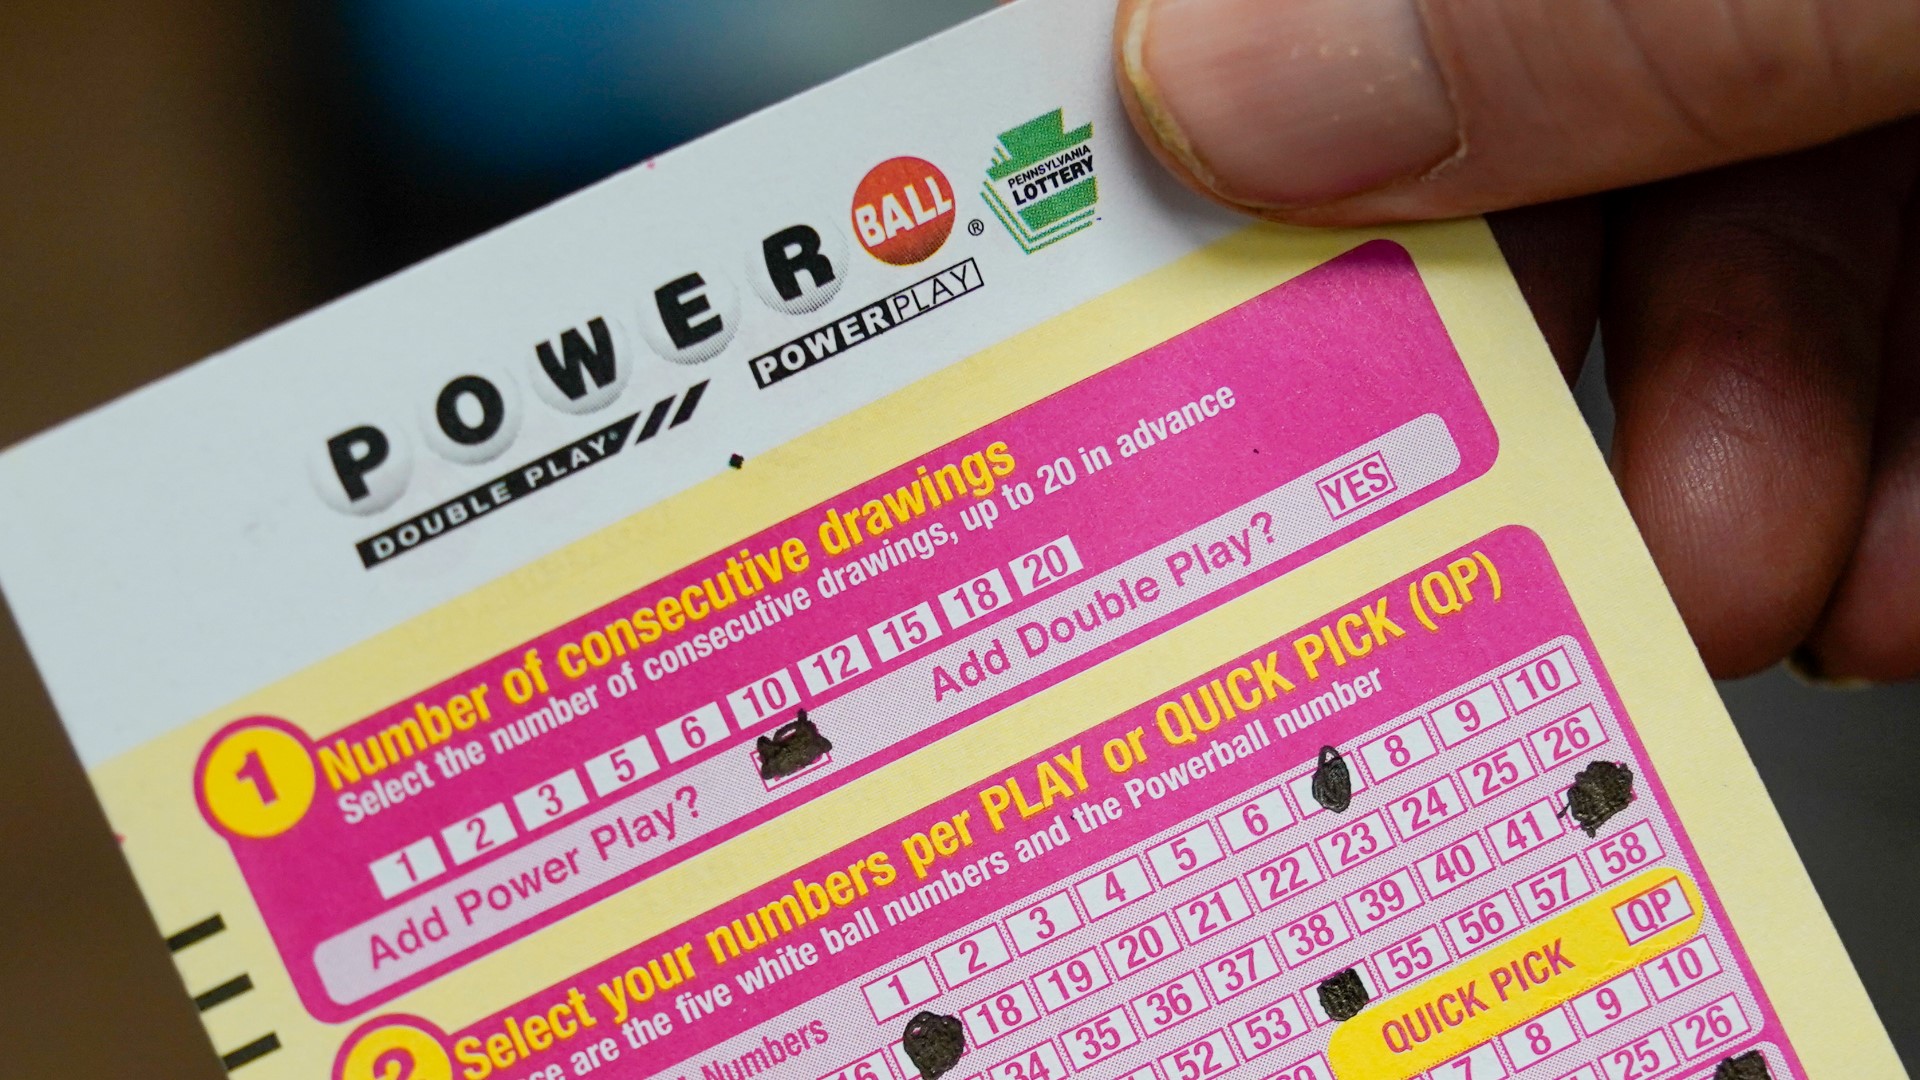 The winning ticket in the New Year's Day Powerball drawing was sold at the Food Castle convenience store in Grand Blanc Township, near Flint, Michigan.